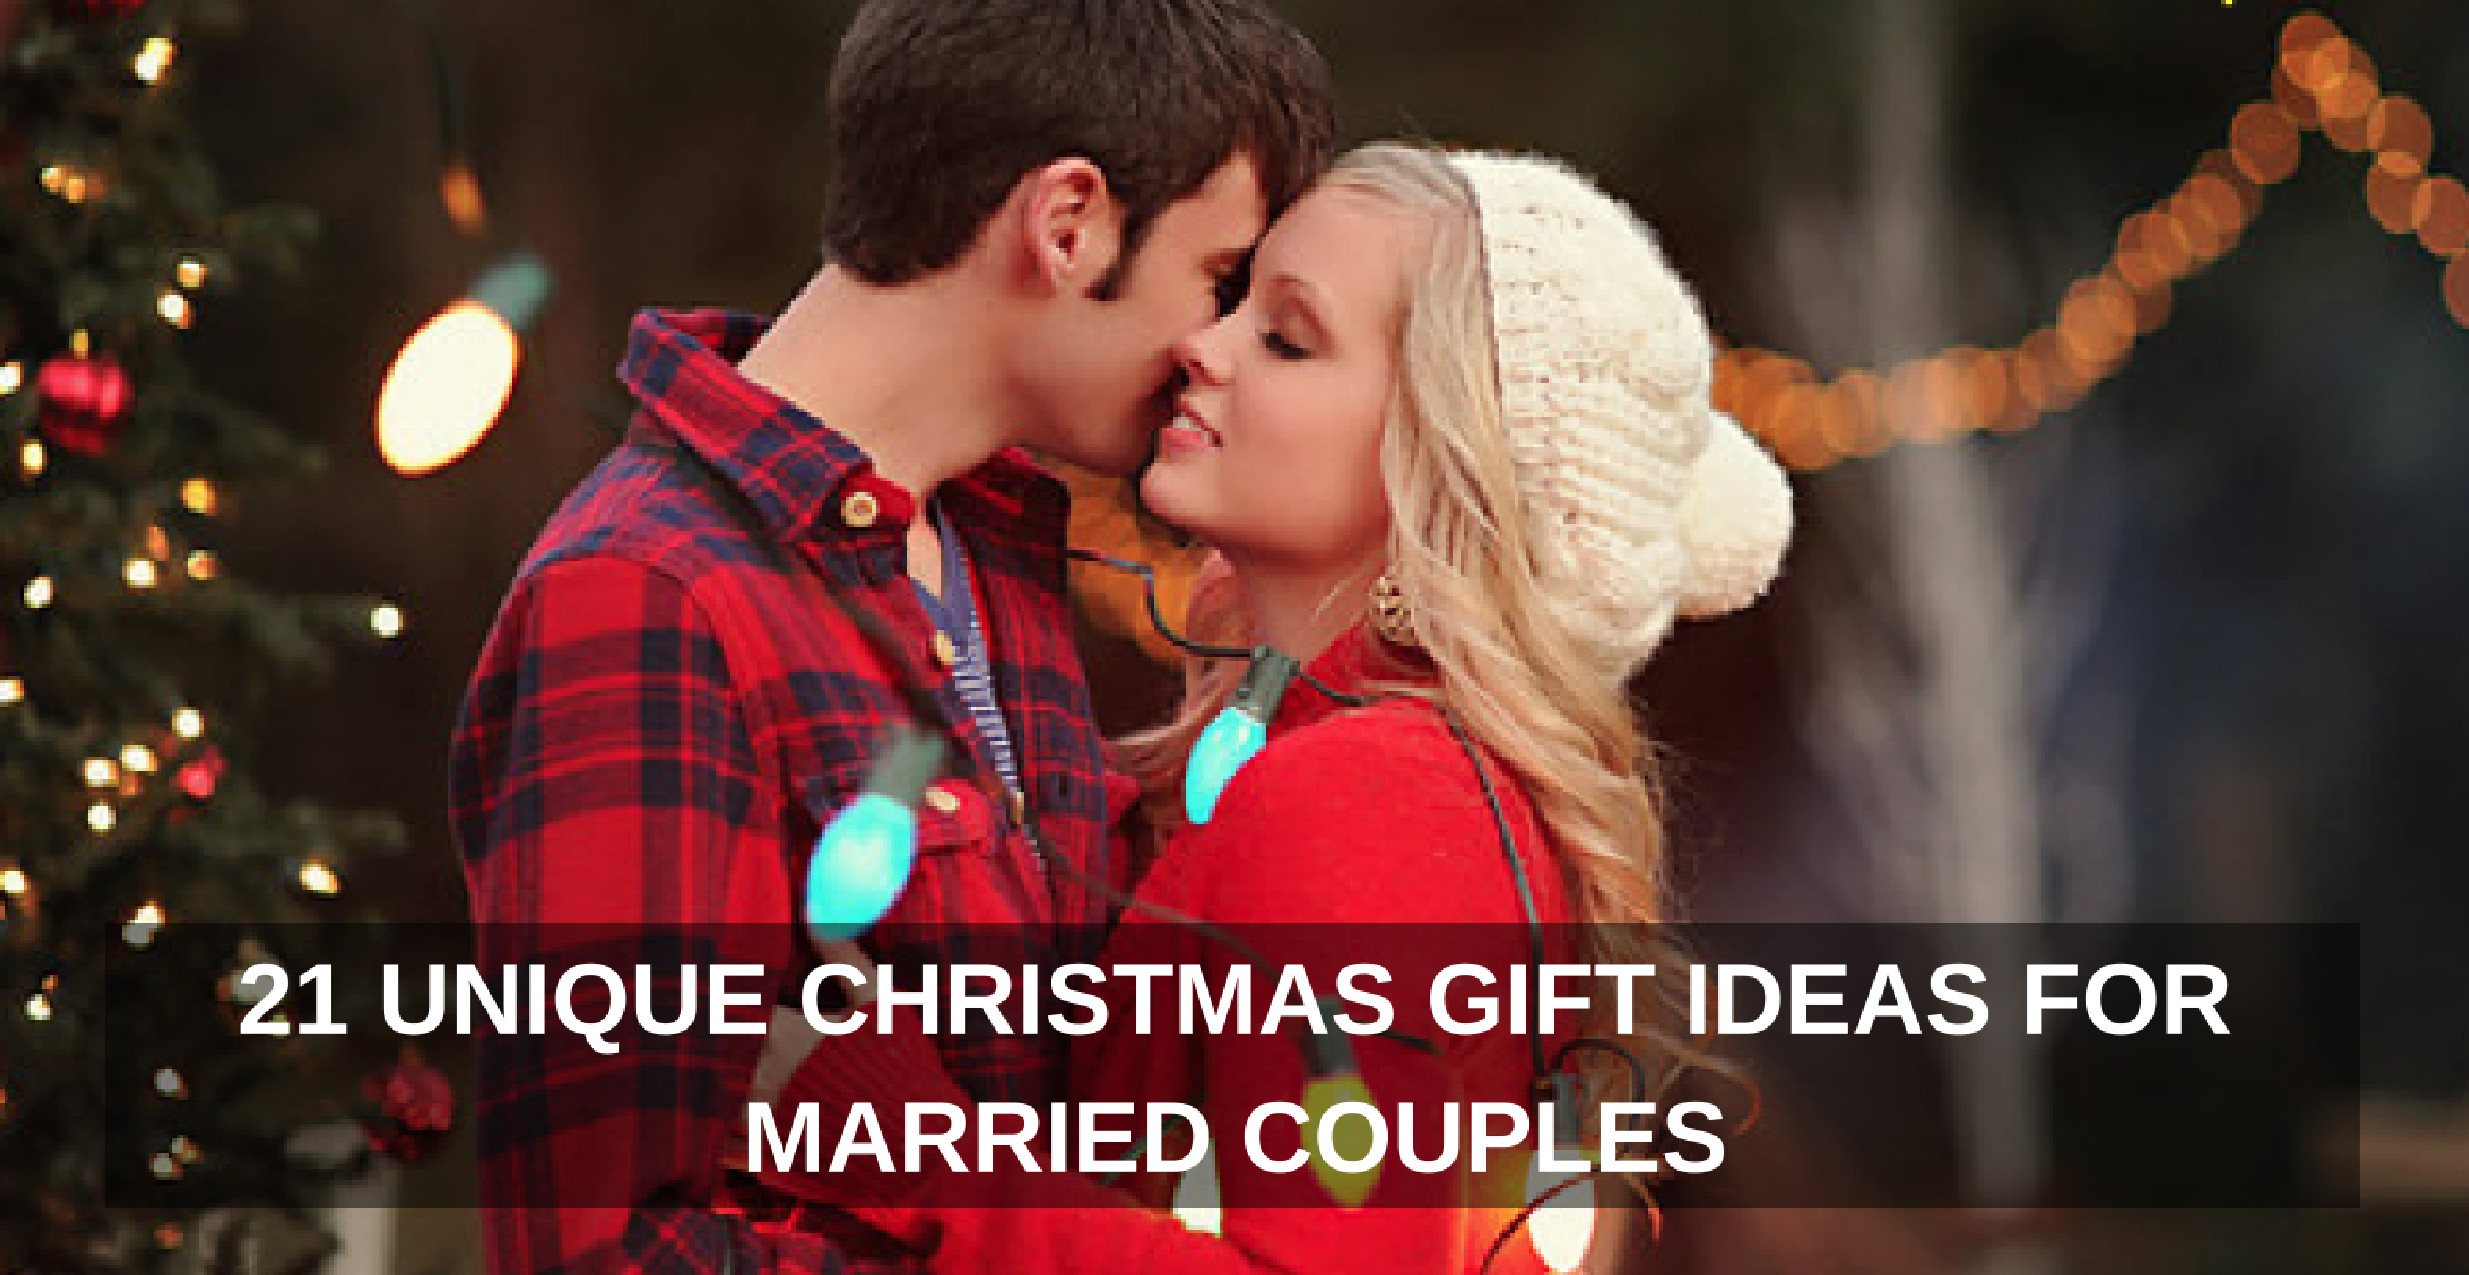 Gift Ideas For Couples For Christmas
 21 Unique Christmas Gift Ideas for Married Couples